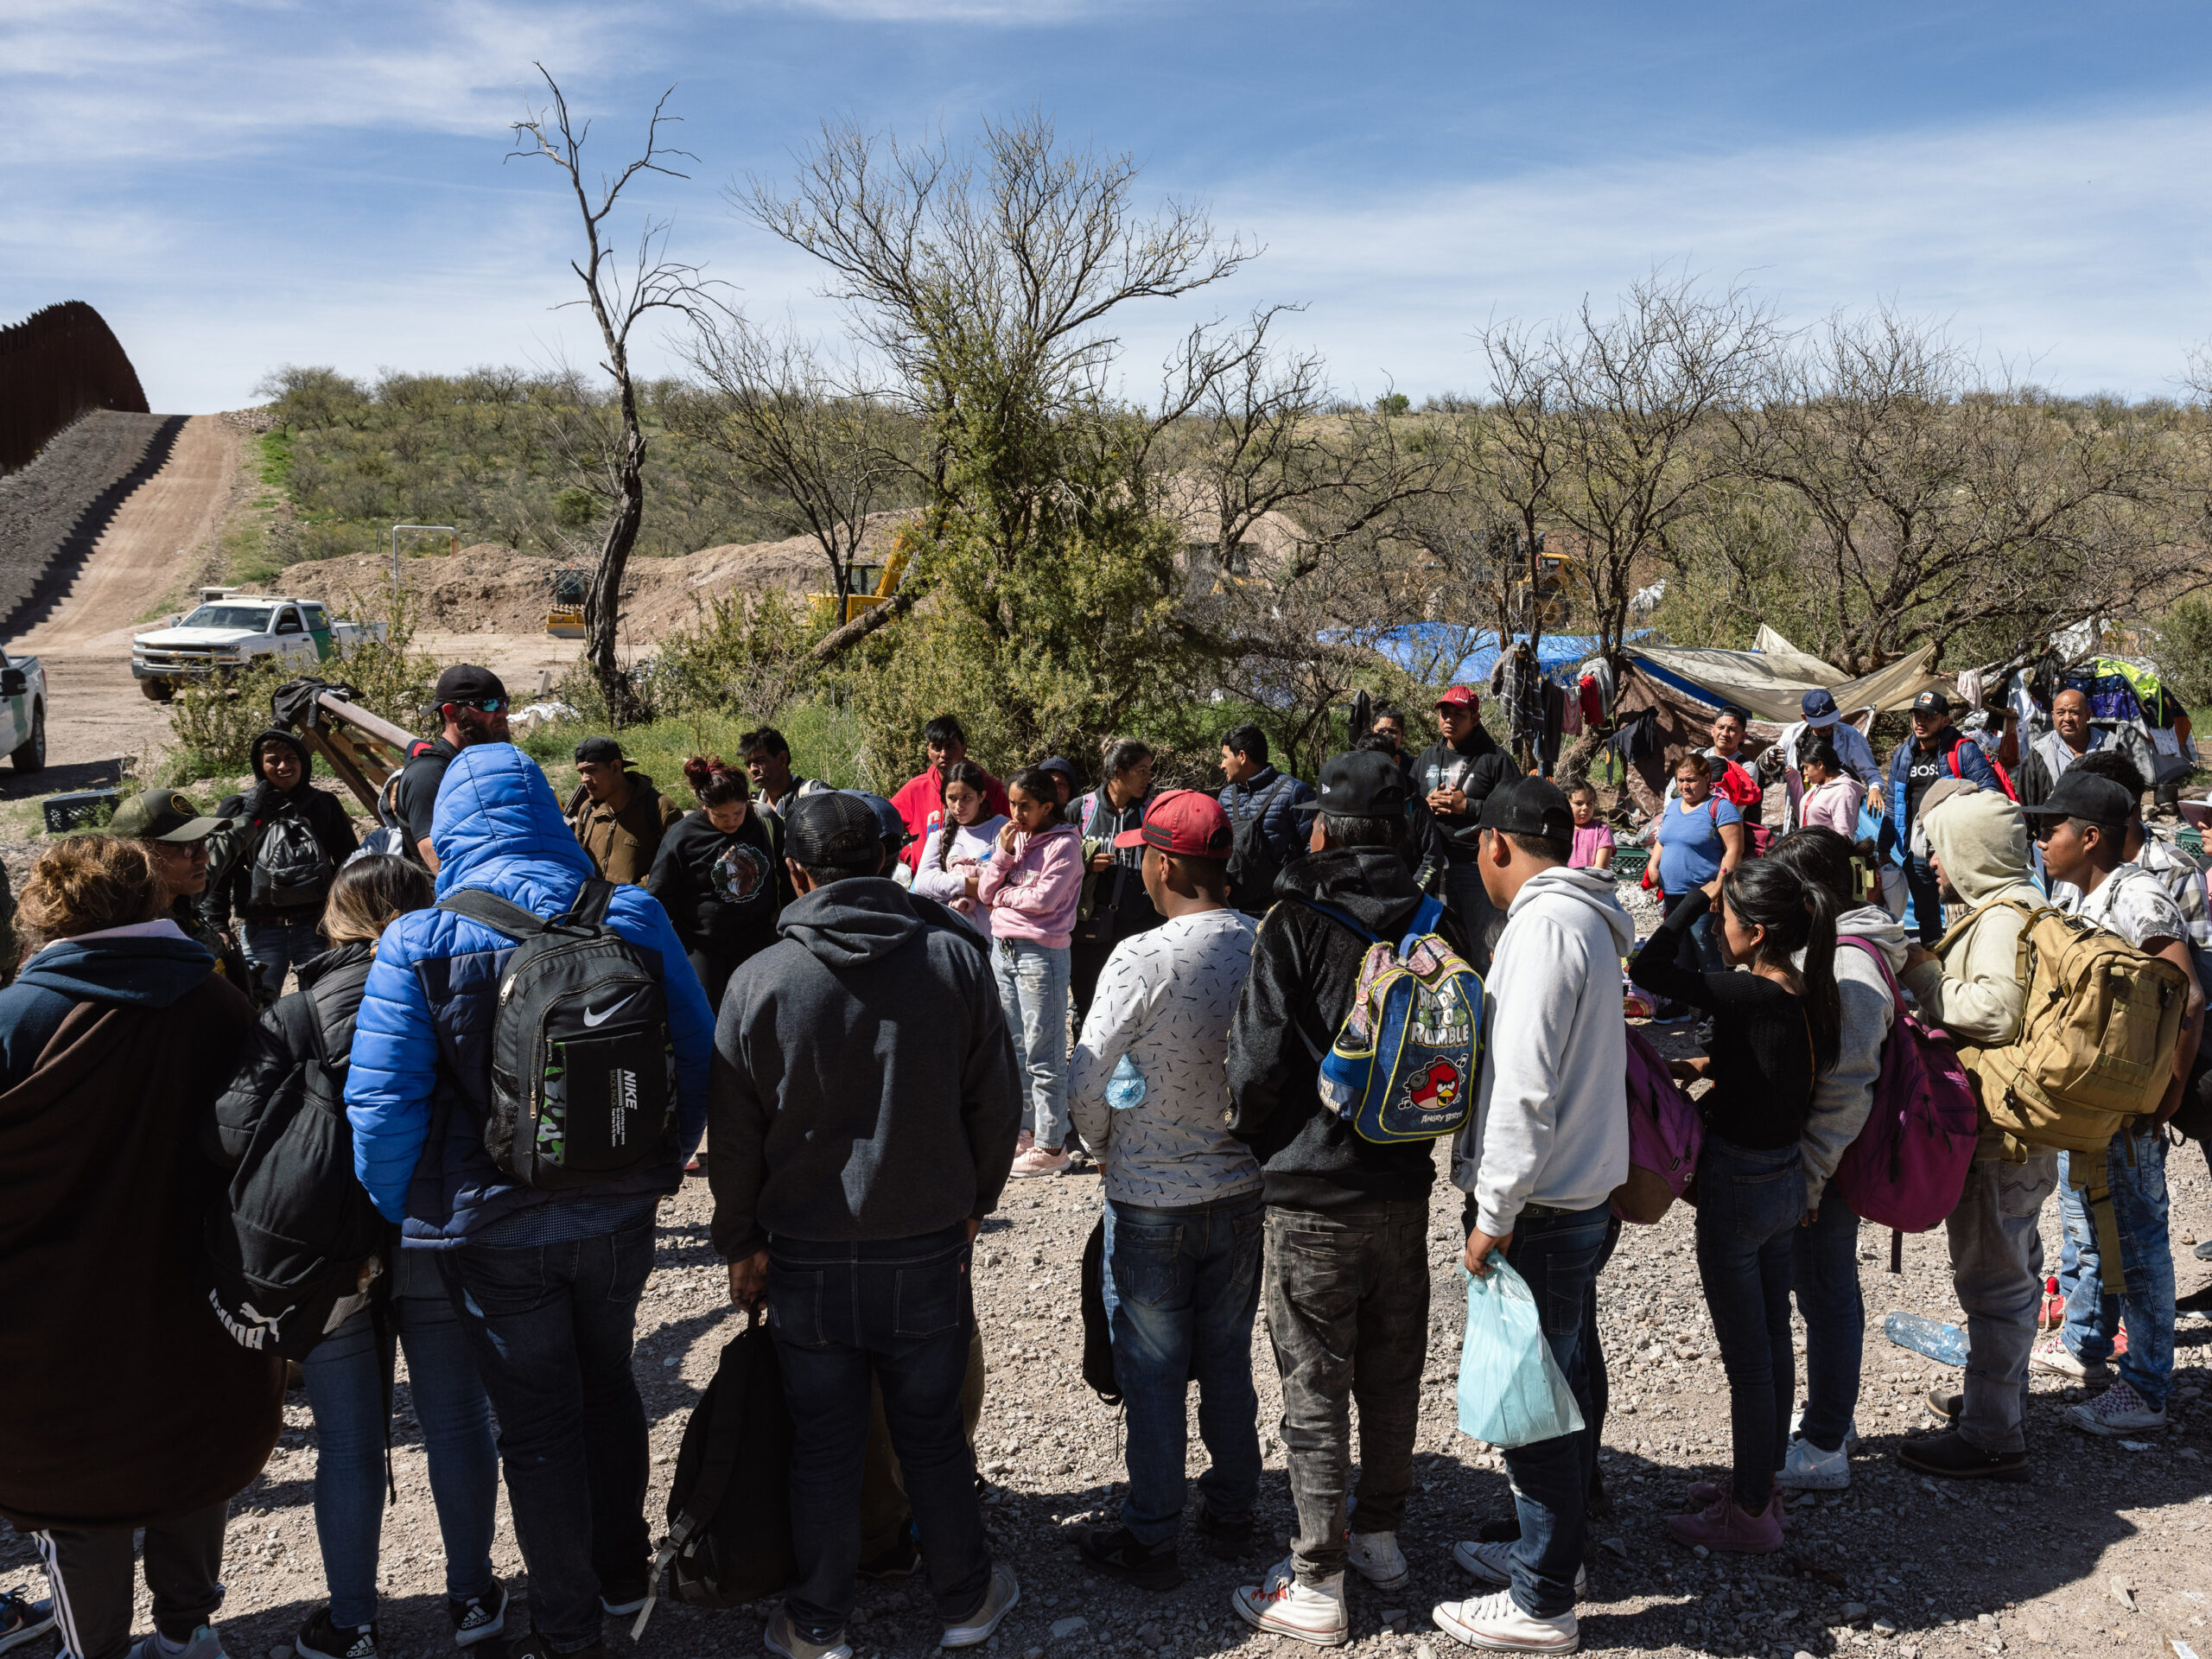 Despite a fortified border, migrants will keep coming, analysts agree. Here’s why.